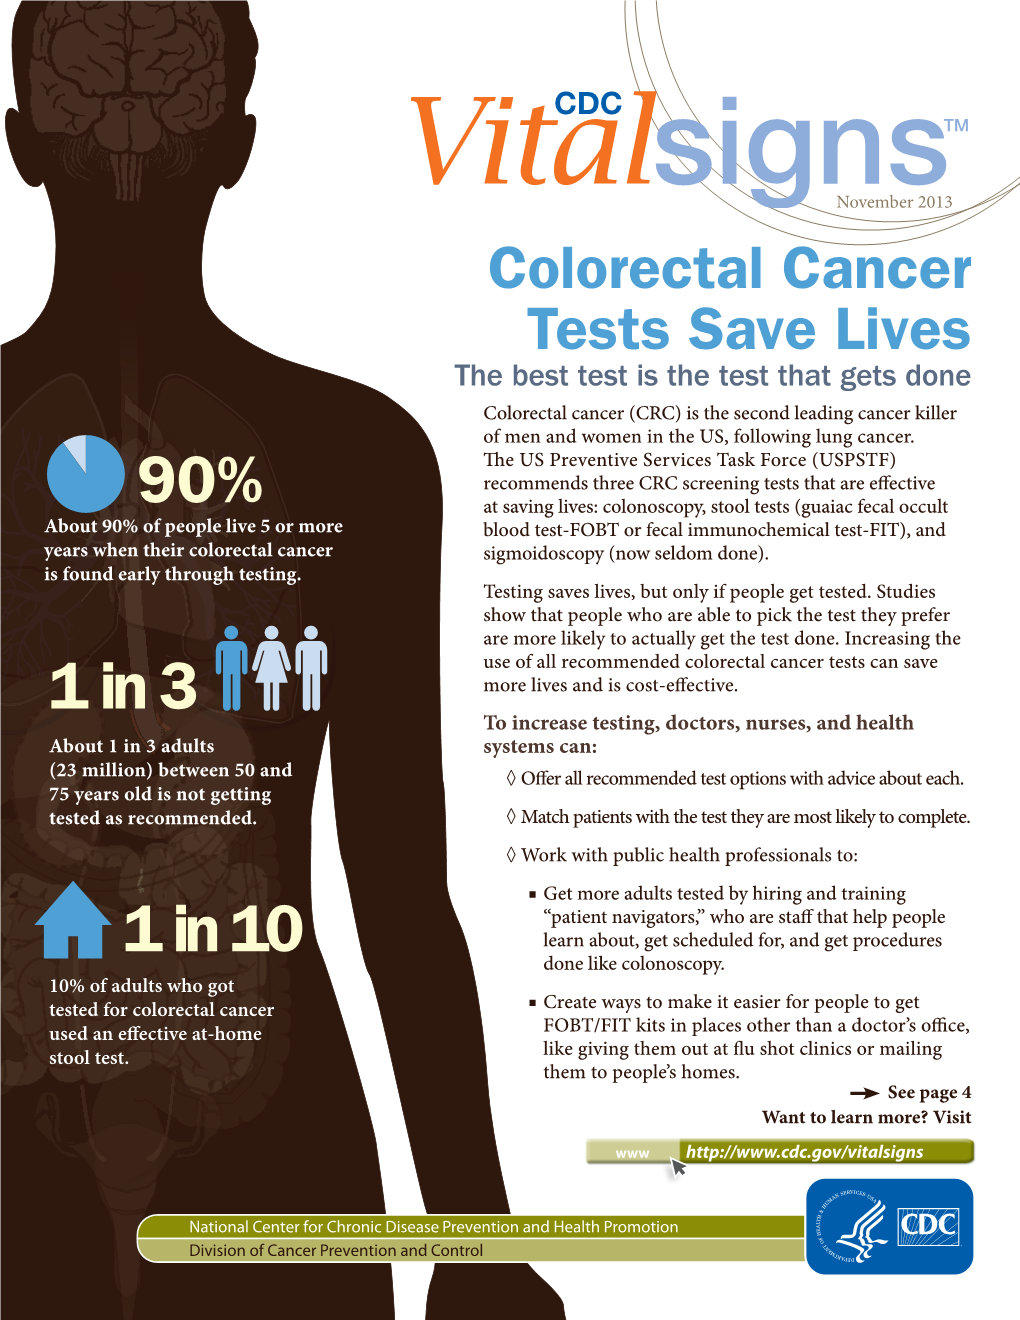 Colorectal Cancer Tests Save Lives: the Best Test Is the Test That Gets Done